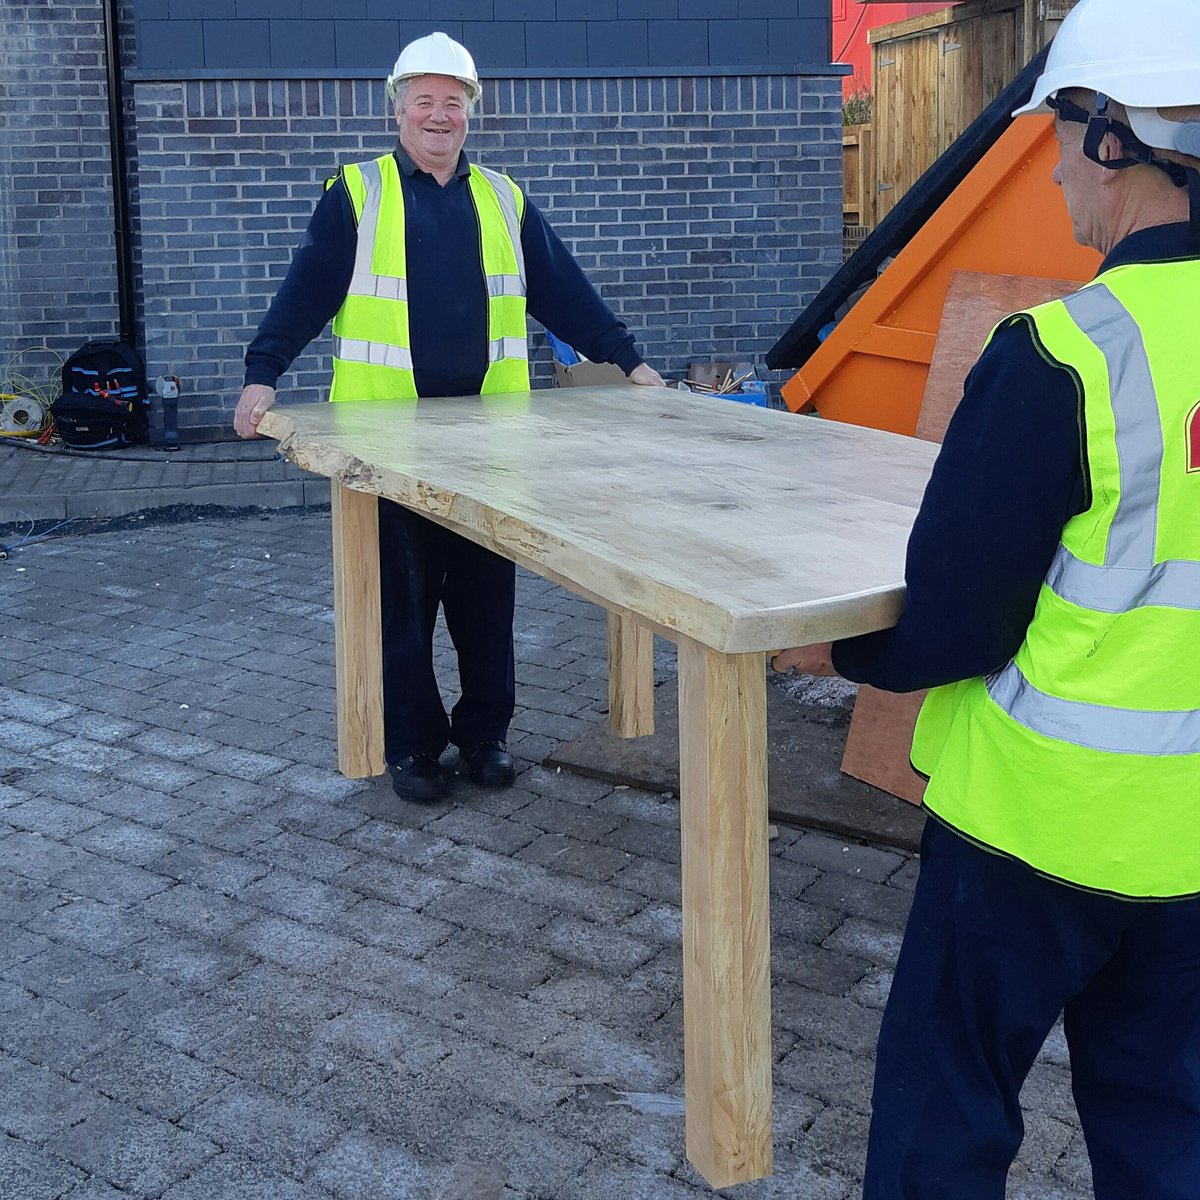 Early start this morning getting ready for day 2 of fit out @Edinburgh_CC Oxgangs YPC home for Care Experienced Children & Young People #interiordesign #rewardingjob beautiful  @GCP_Edinburgh sycamore timber dining table is going to take pride of place!